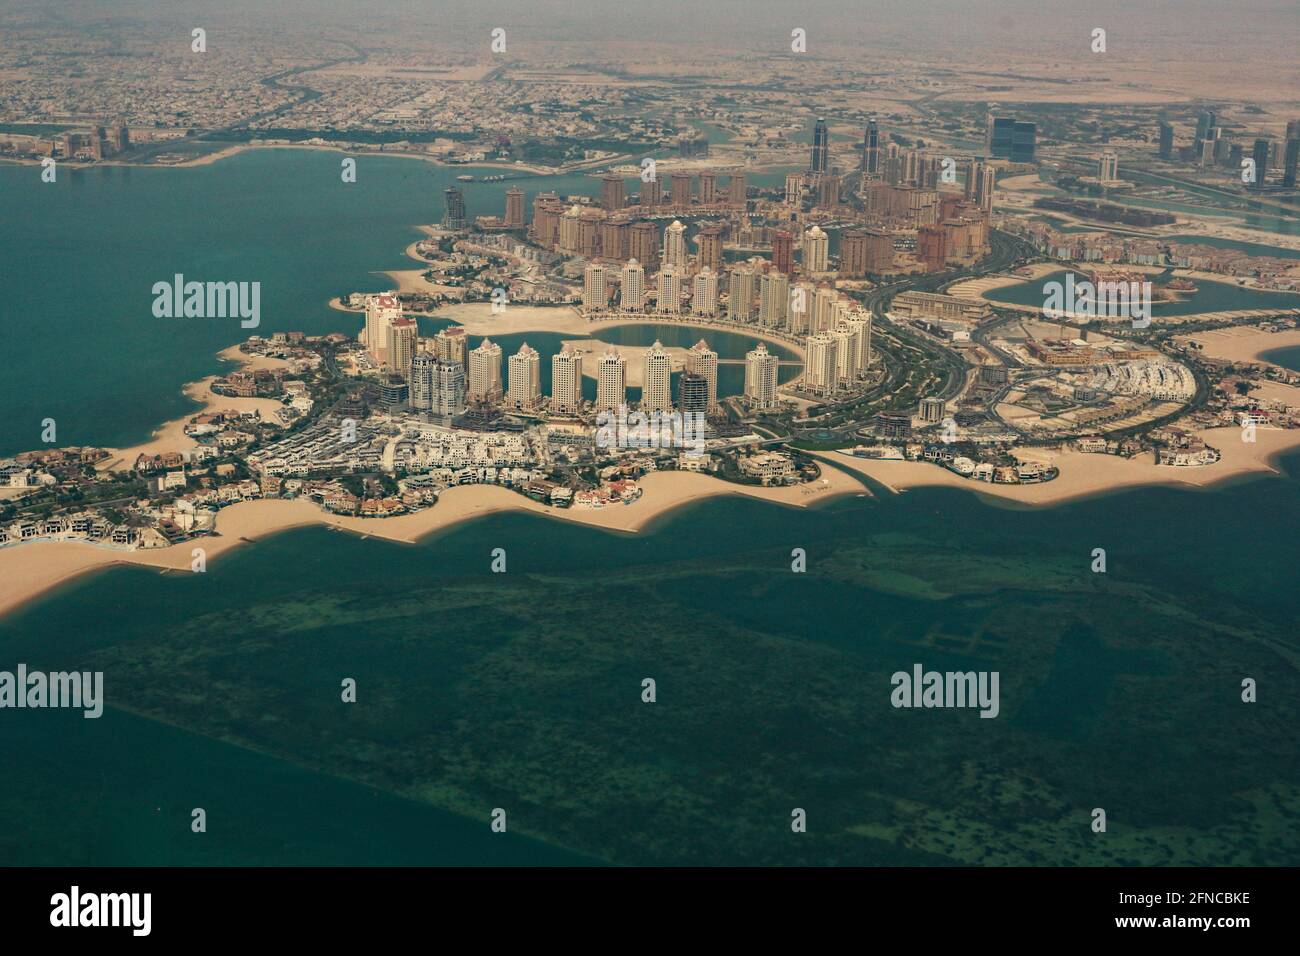 Doha – Qatar, May 12, 2021: Aerial view showing The Pearl-Qatar island, one of the largest real-estate developments in the Middle East Stock Photo